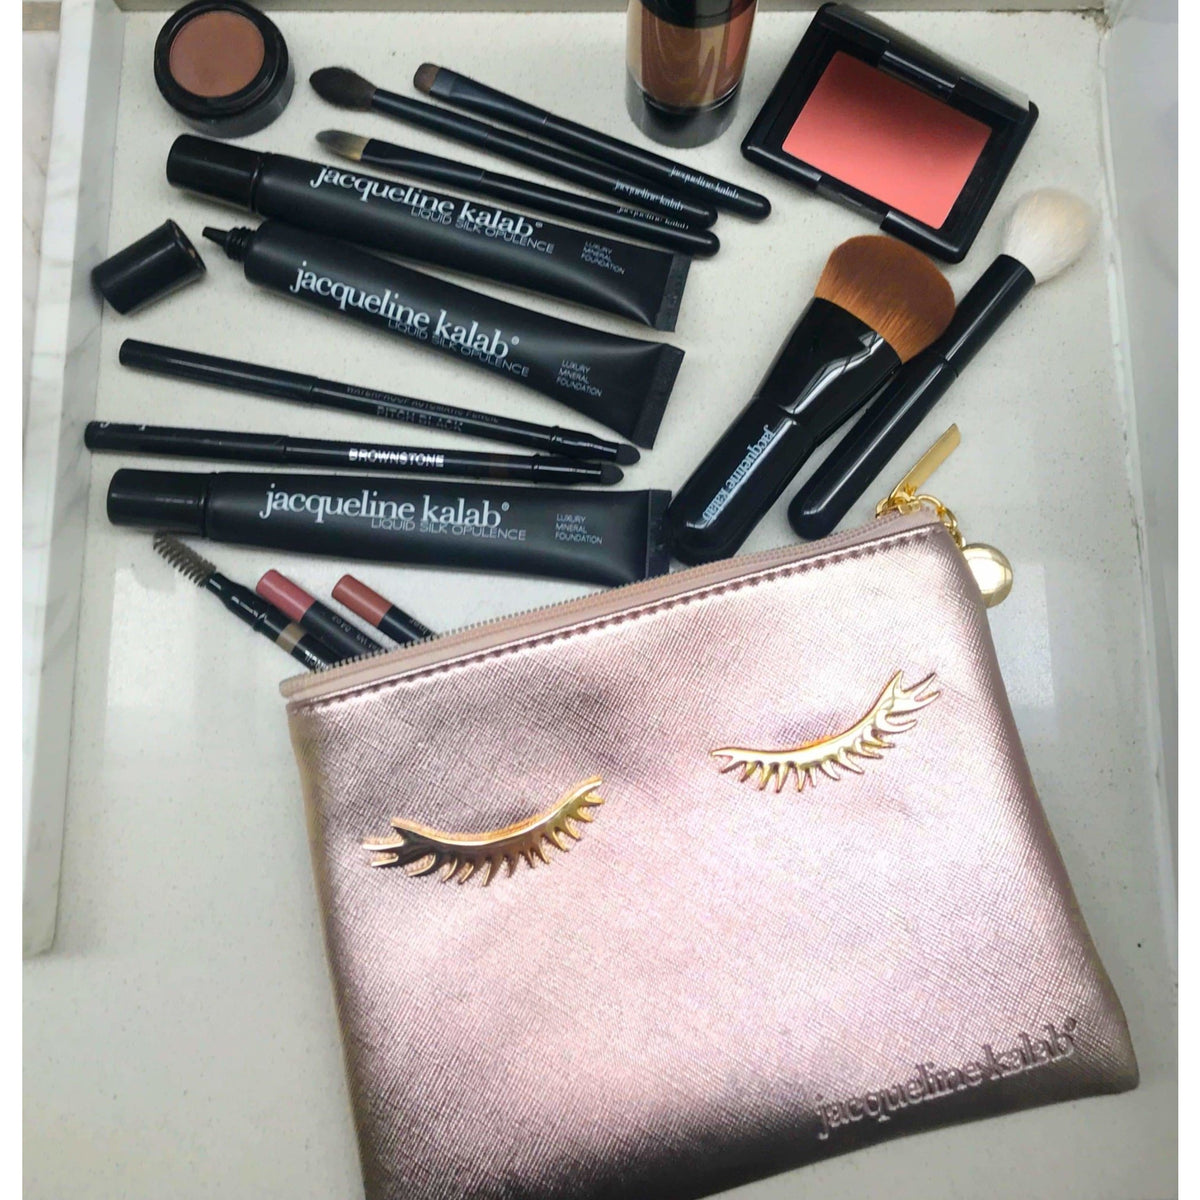 The Ultimate Makeup Bag - MyMakeup.Store by Jacqueline Kalab